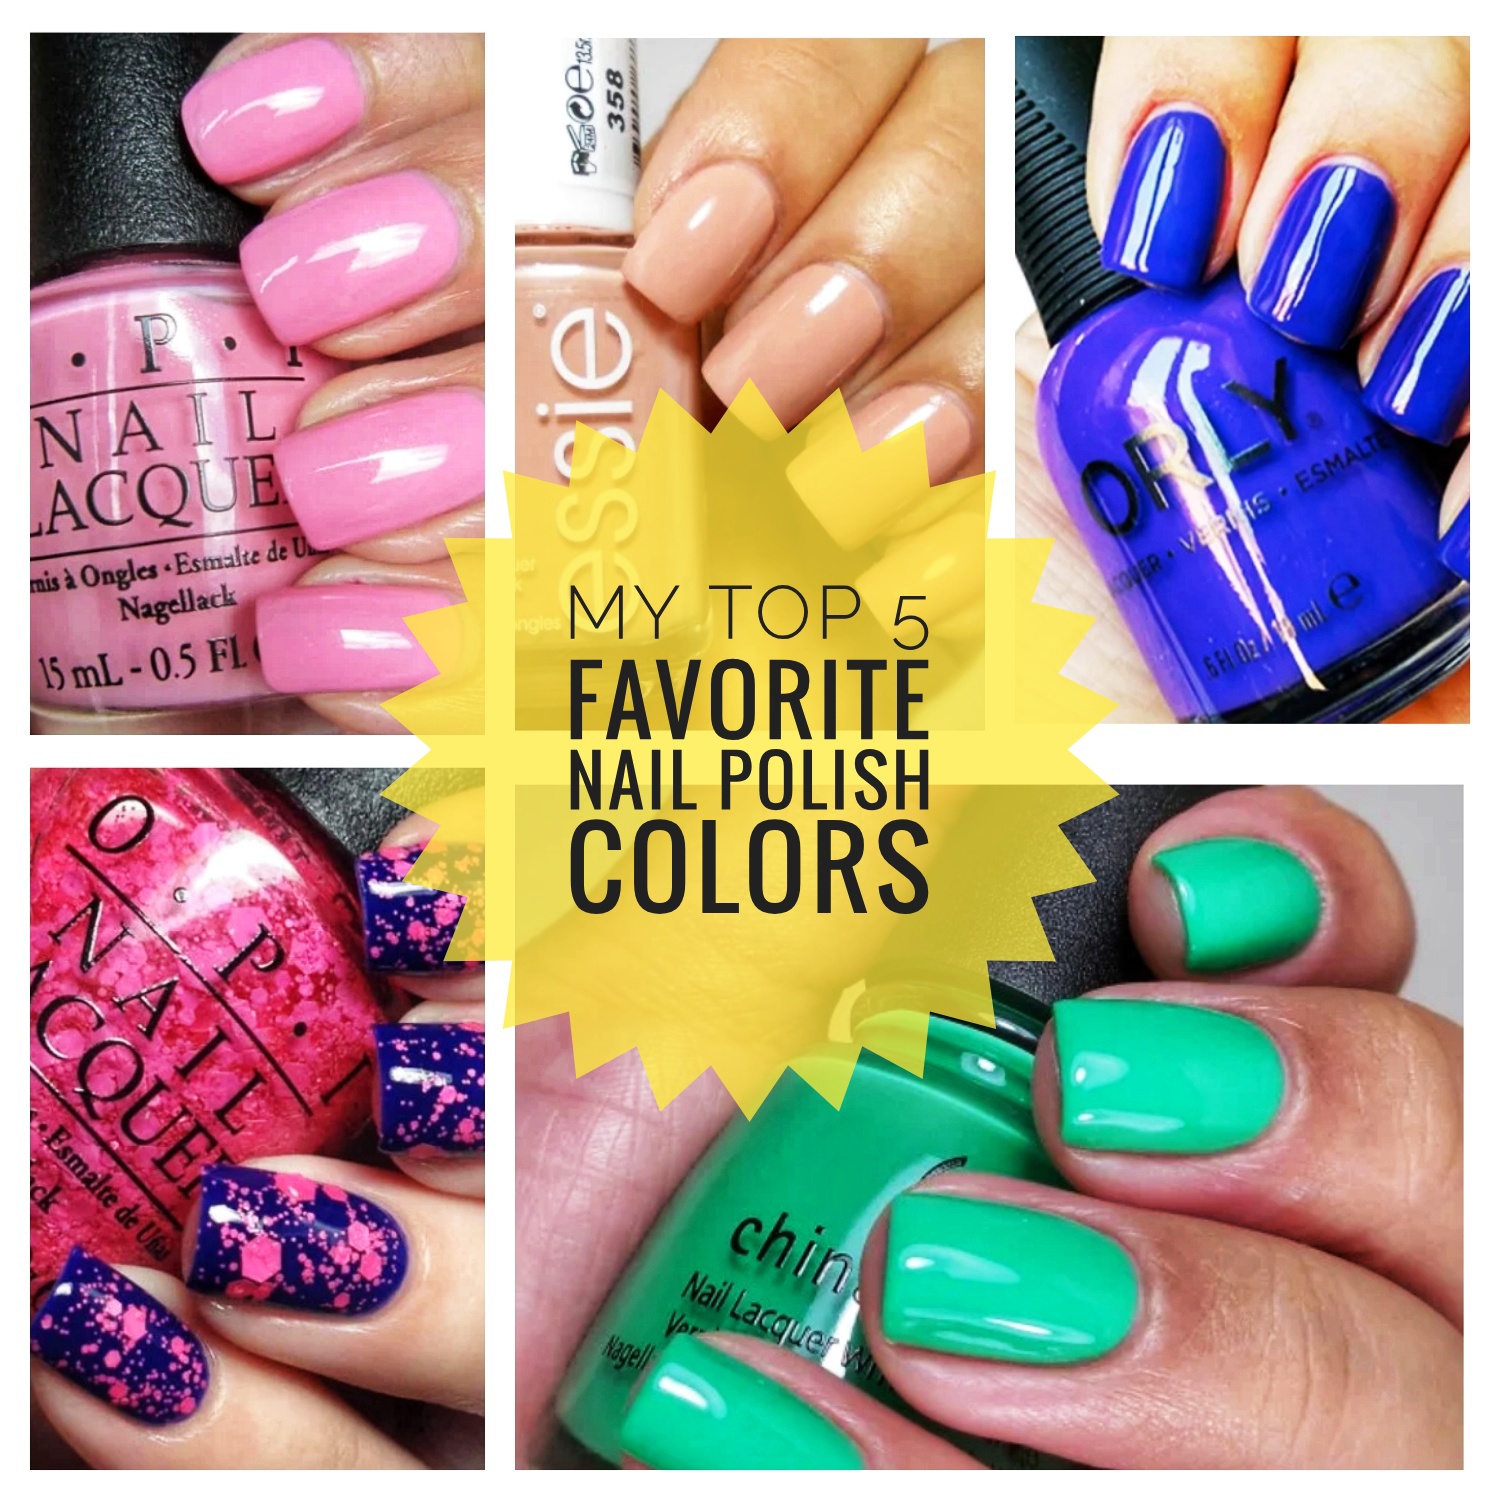 Goodbye Summer + Favorite Nail Polishes I Used This Summer - Vote Beauty